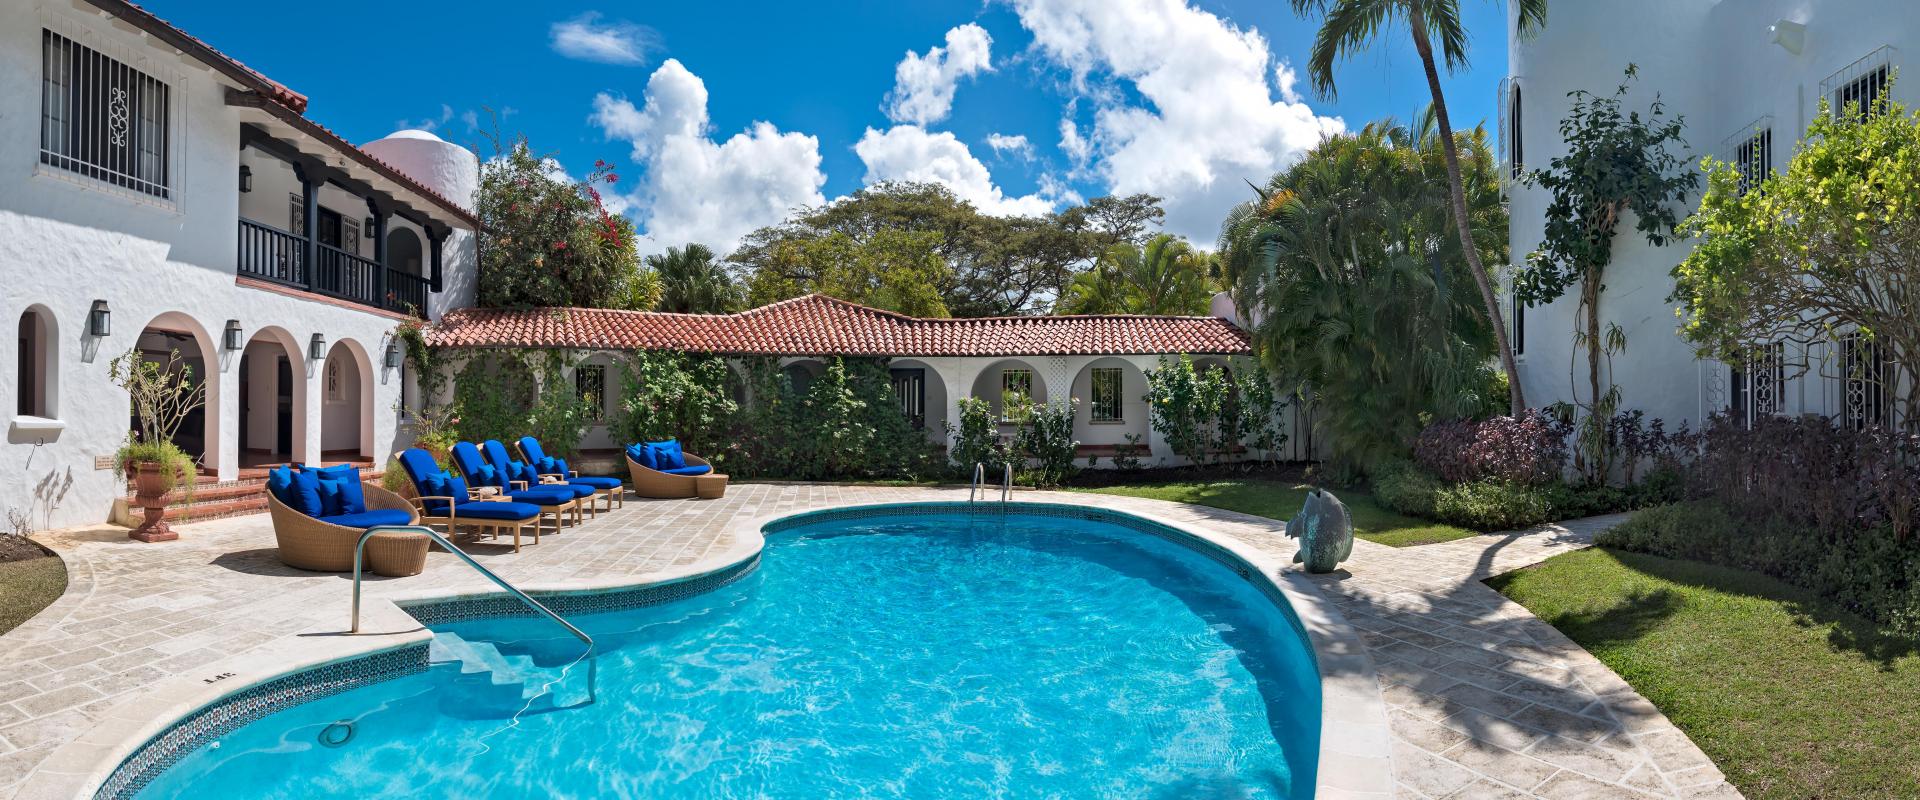 Swimming Pool at Elsewhere 10 Bedroom Sandy Lane Villa For Rent In Barbados 